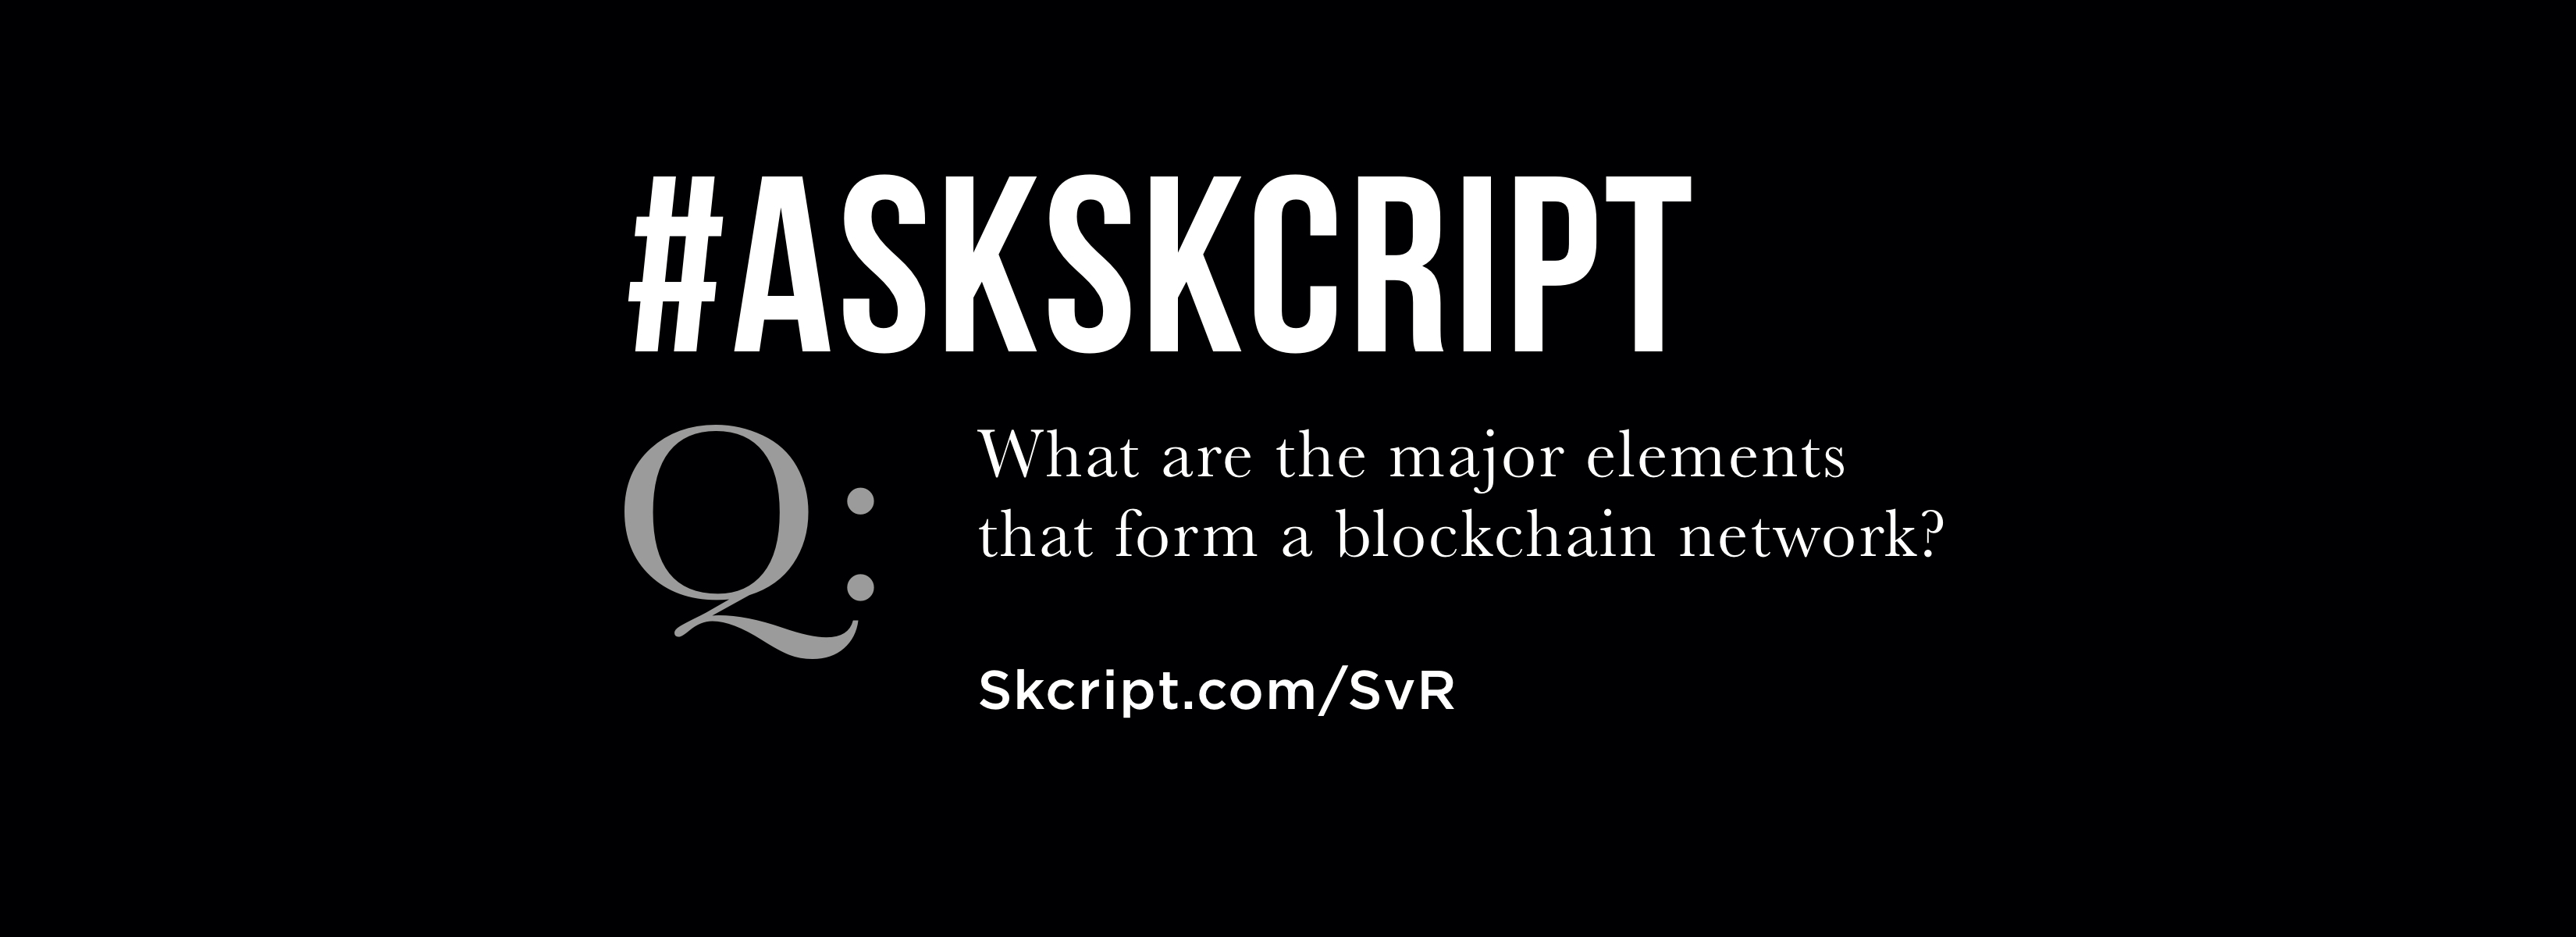 #AskSkcript: What are the elements of a blockchain?